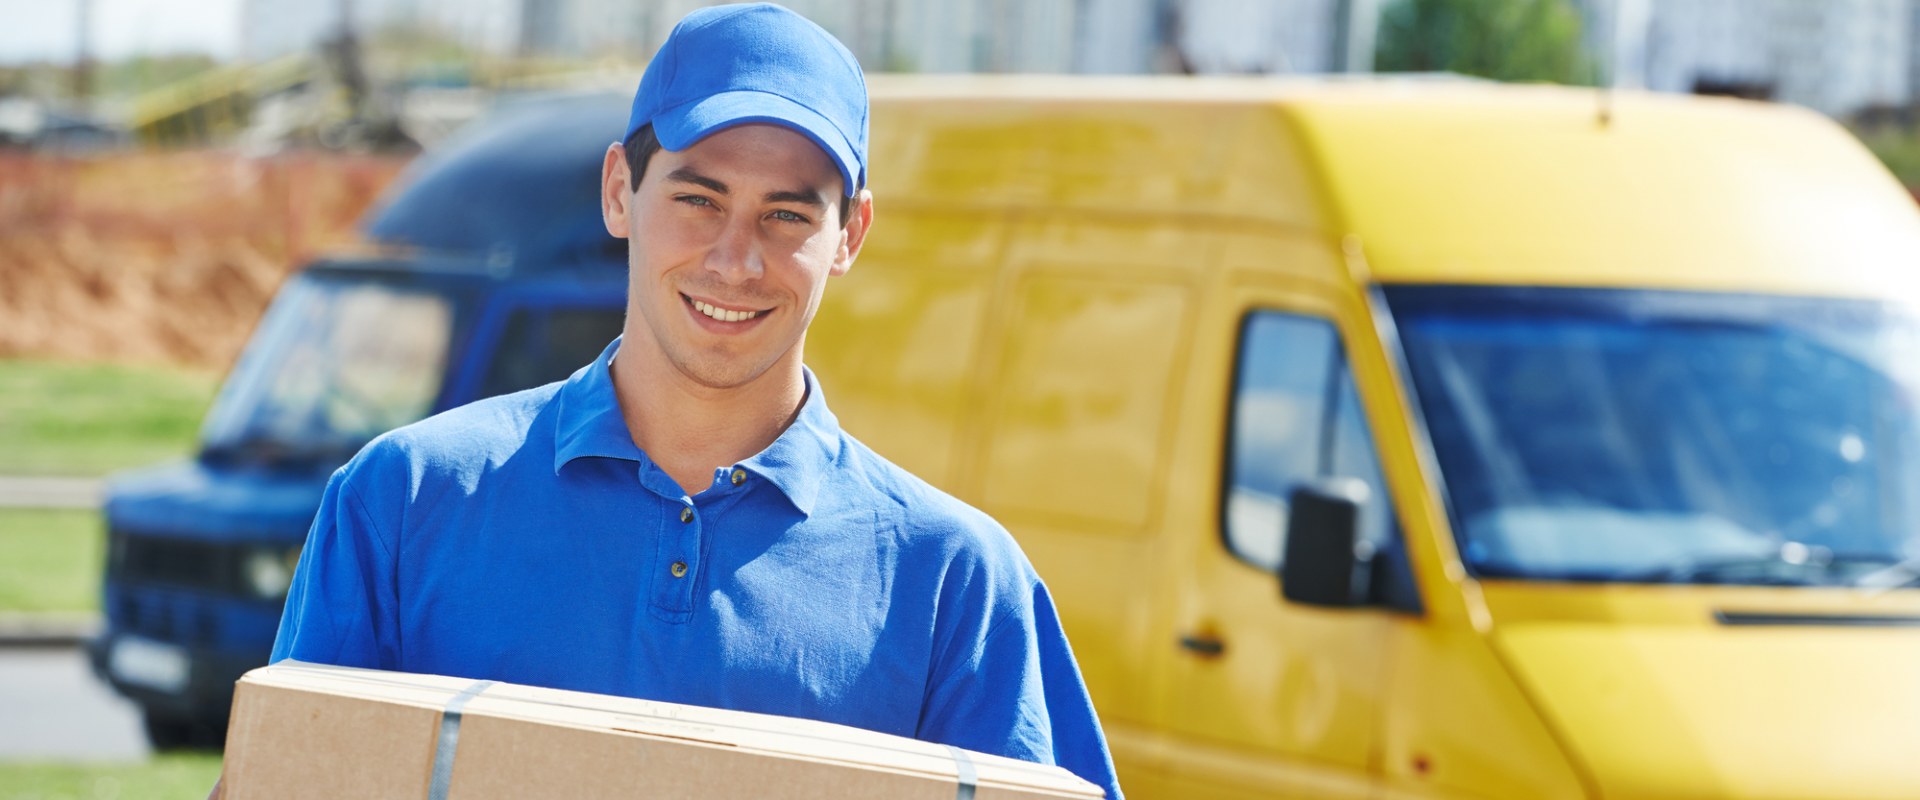 Scheduled Same-Day Delivery: The Reliable and Efficient Way to Move Goods and People